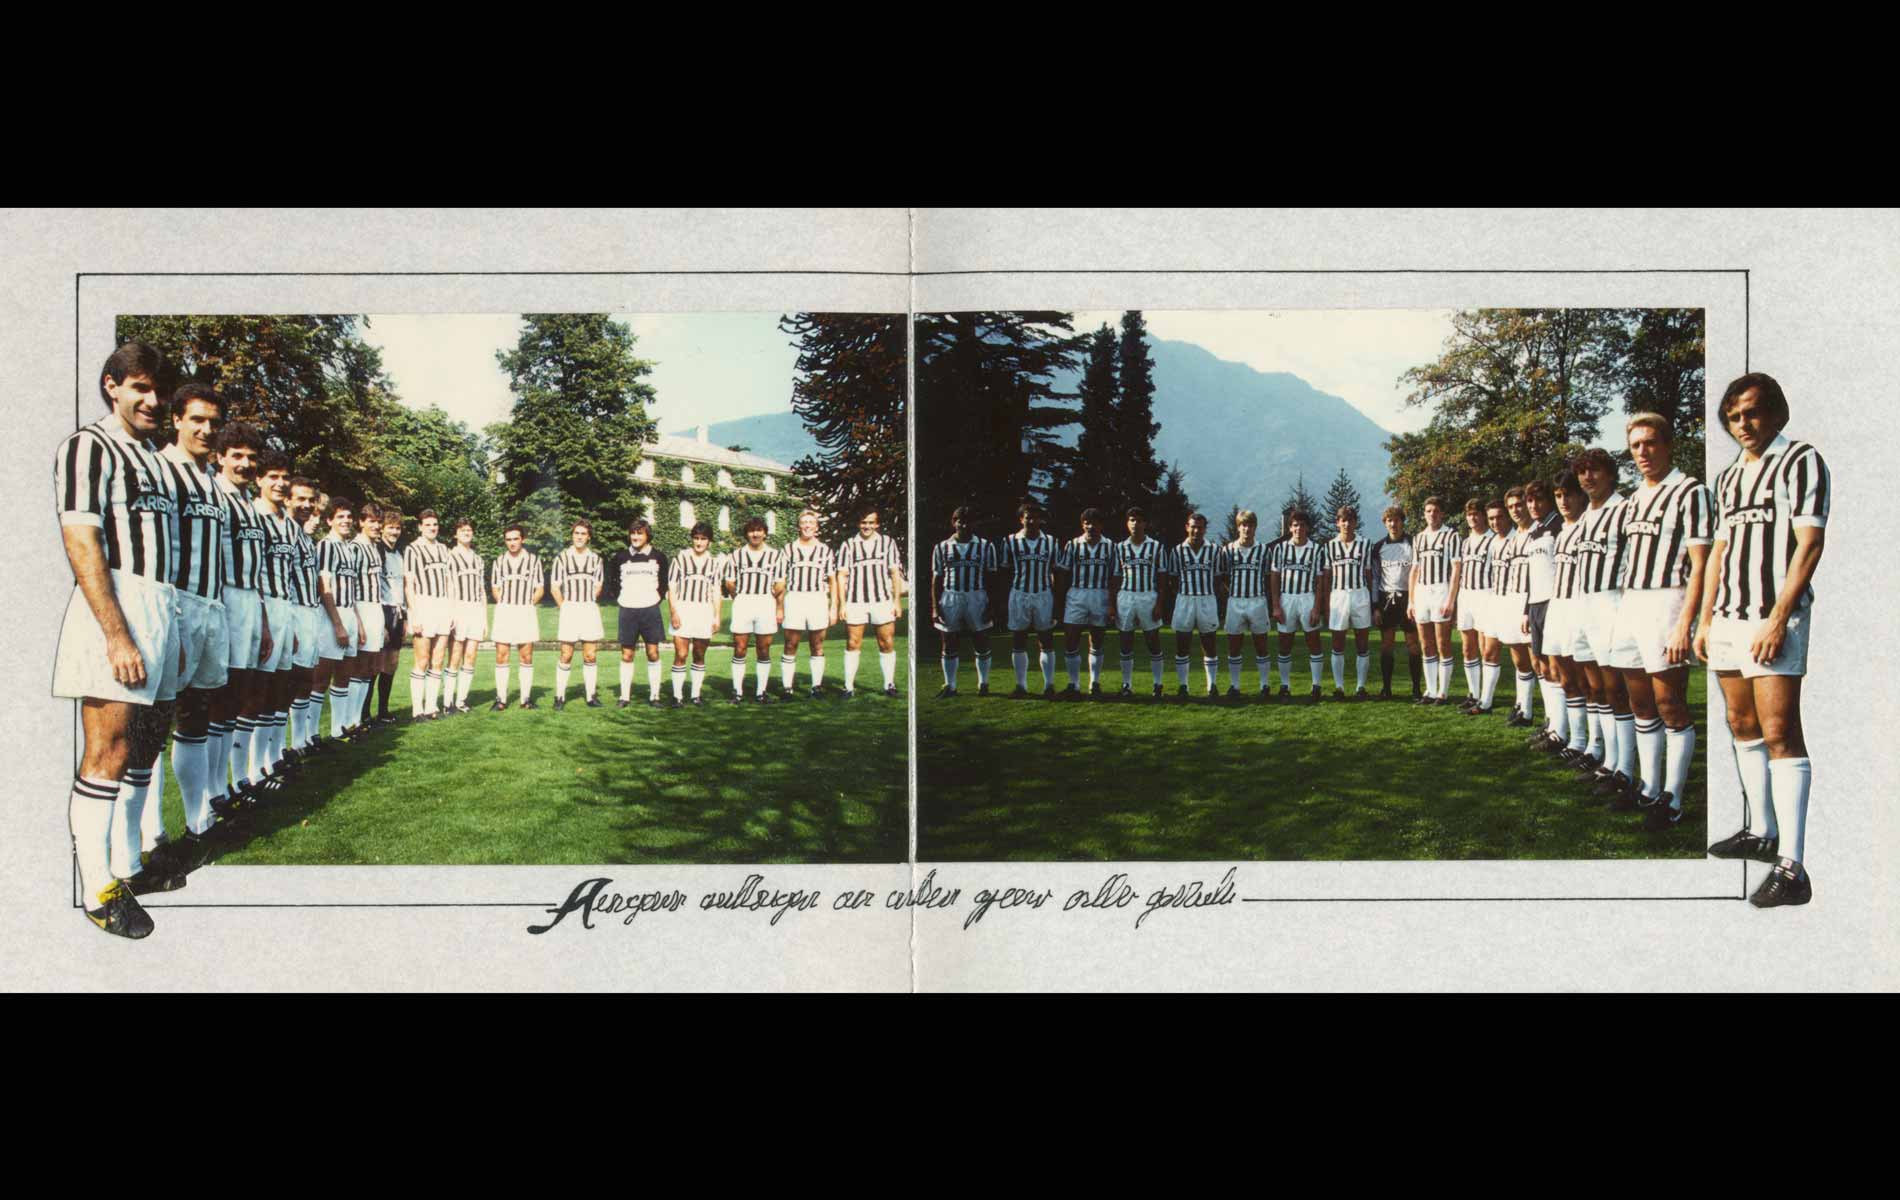 FIAT JUVENTUS - GREETINGS CARDS 1986 x Avv.Giovanni AGNELLI with JUVENTUS Football Team - © Graziano Villa